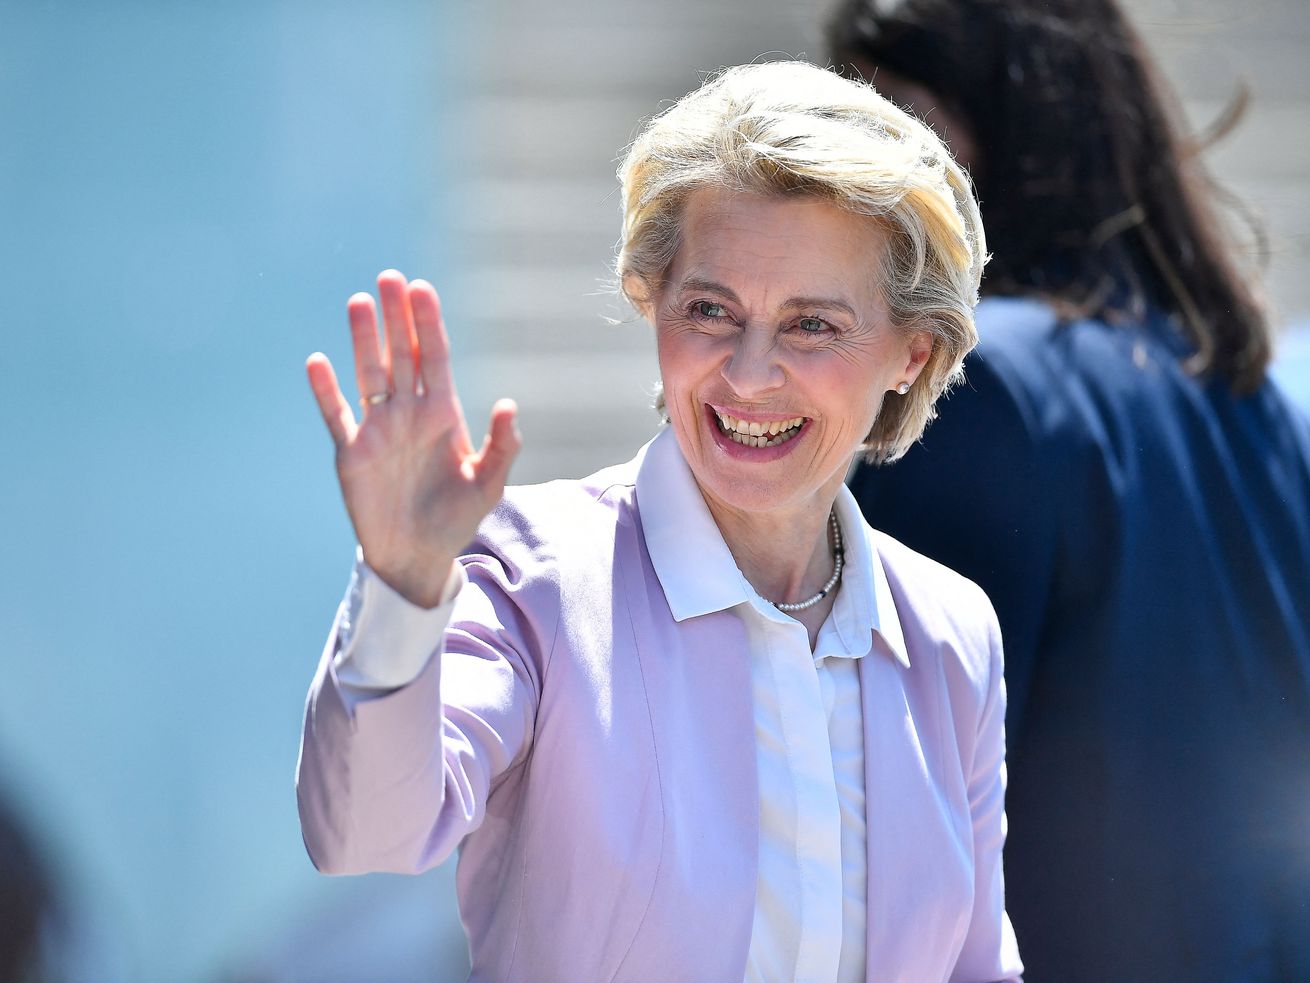 European Commission President Ursula von der Leyen announced a proposed Russian oil embargo, but it has yet to be adopted.